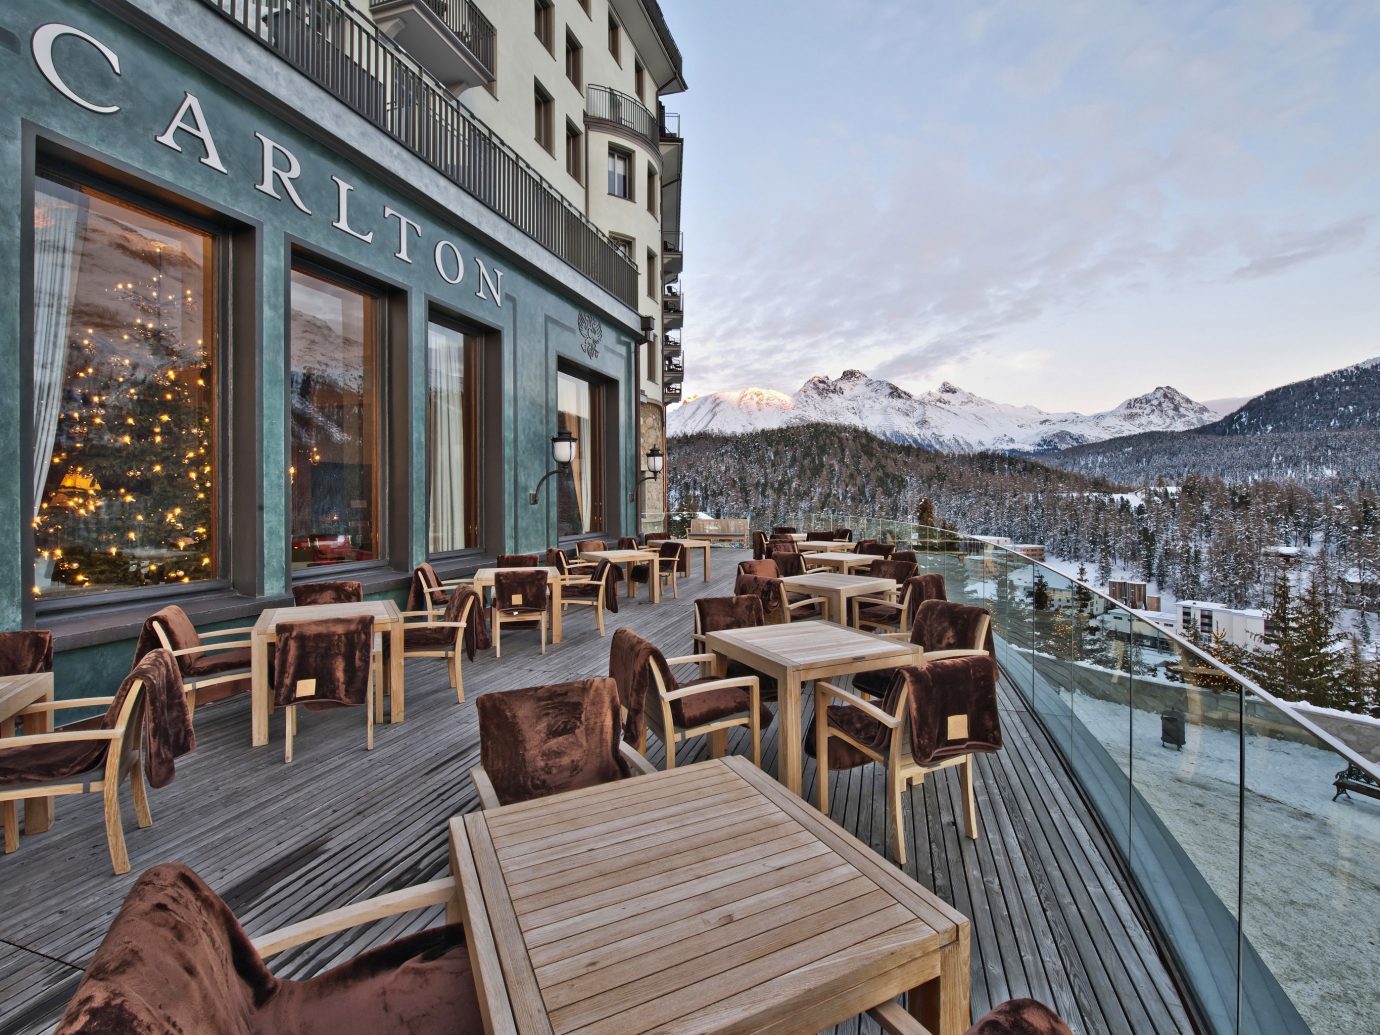 Tables on a deck at the Hotel Carlton in St. Moritz Switzerland